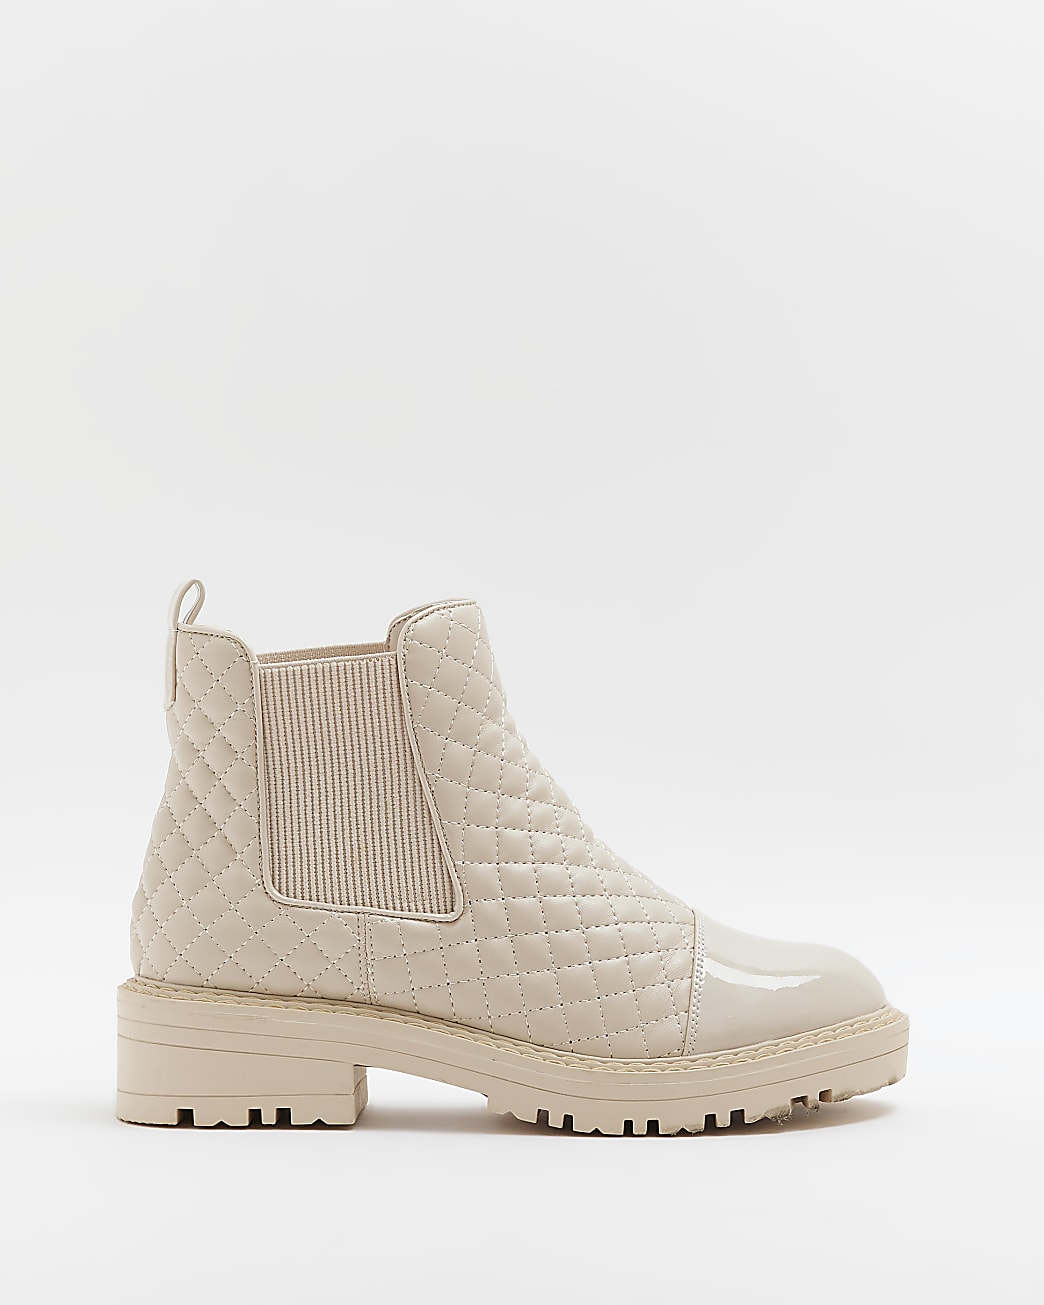 riverisland.com | CREAM QUILTED CHELSEA BOOTS